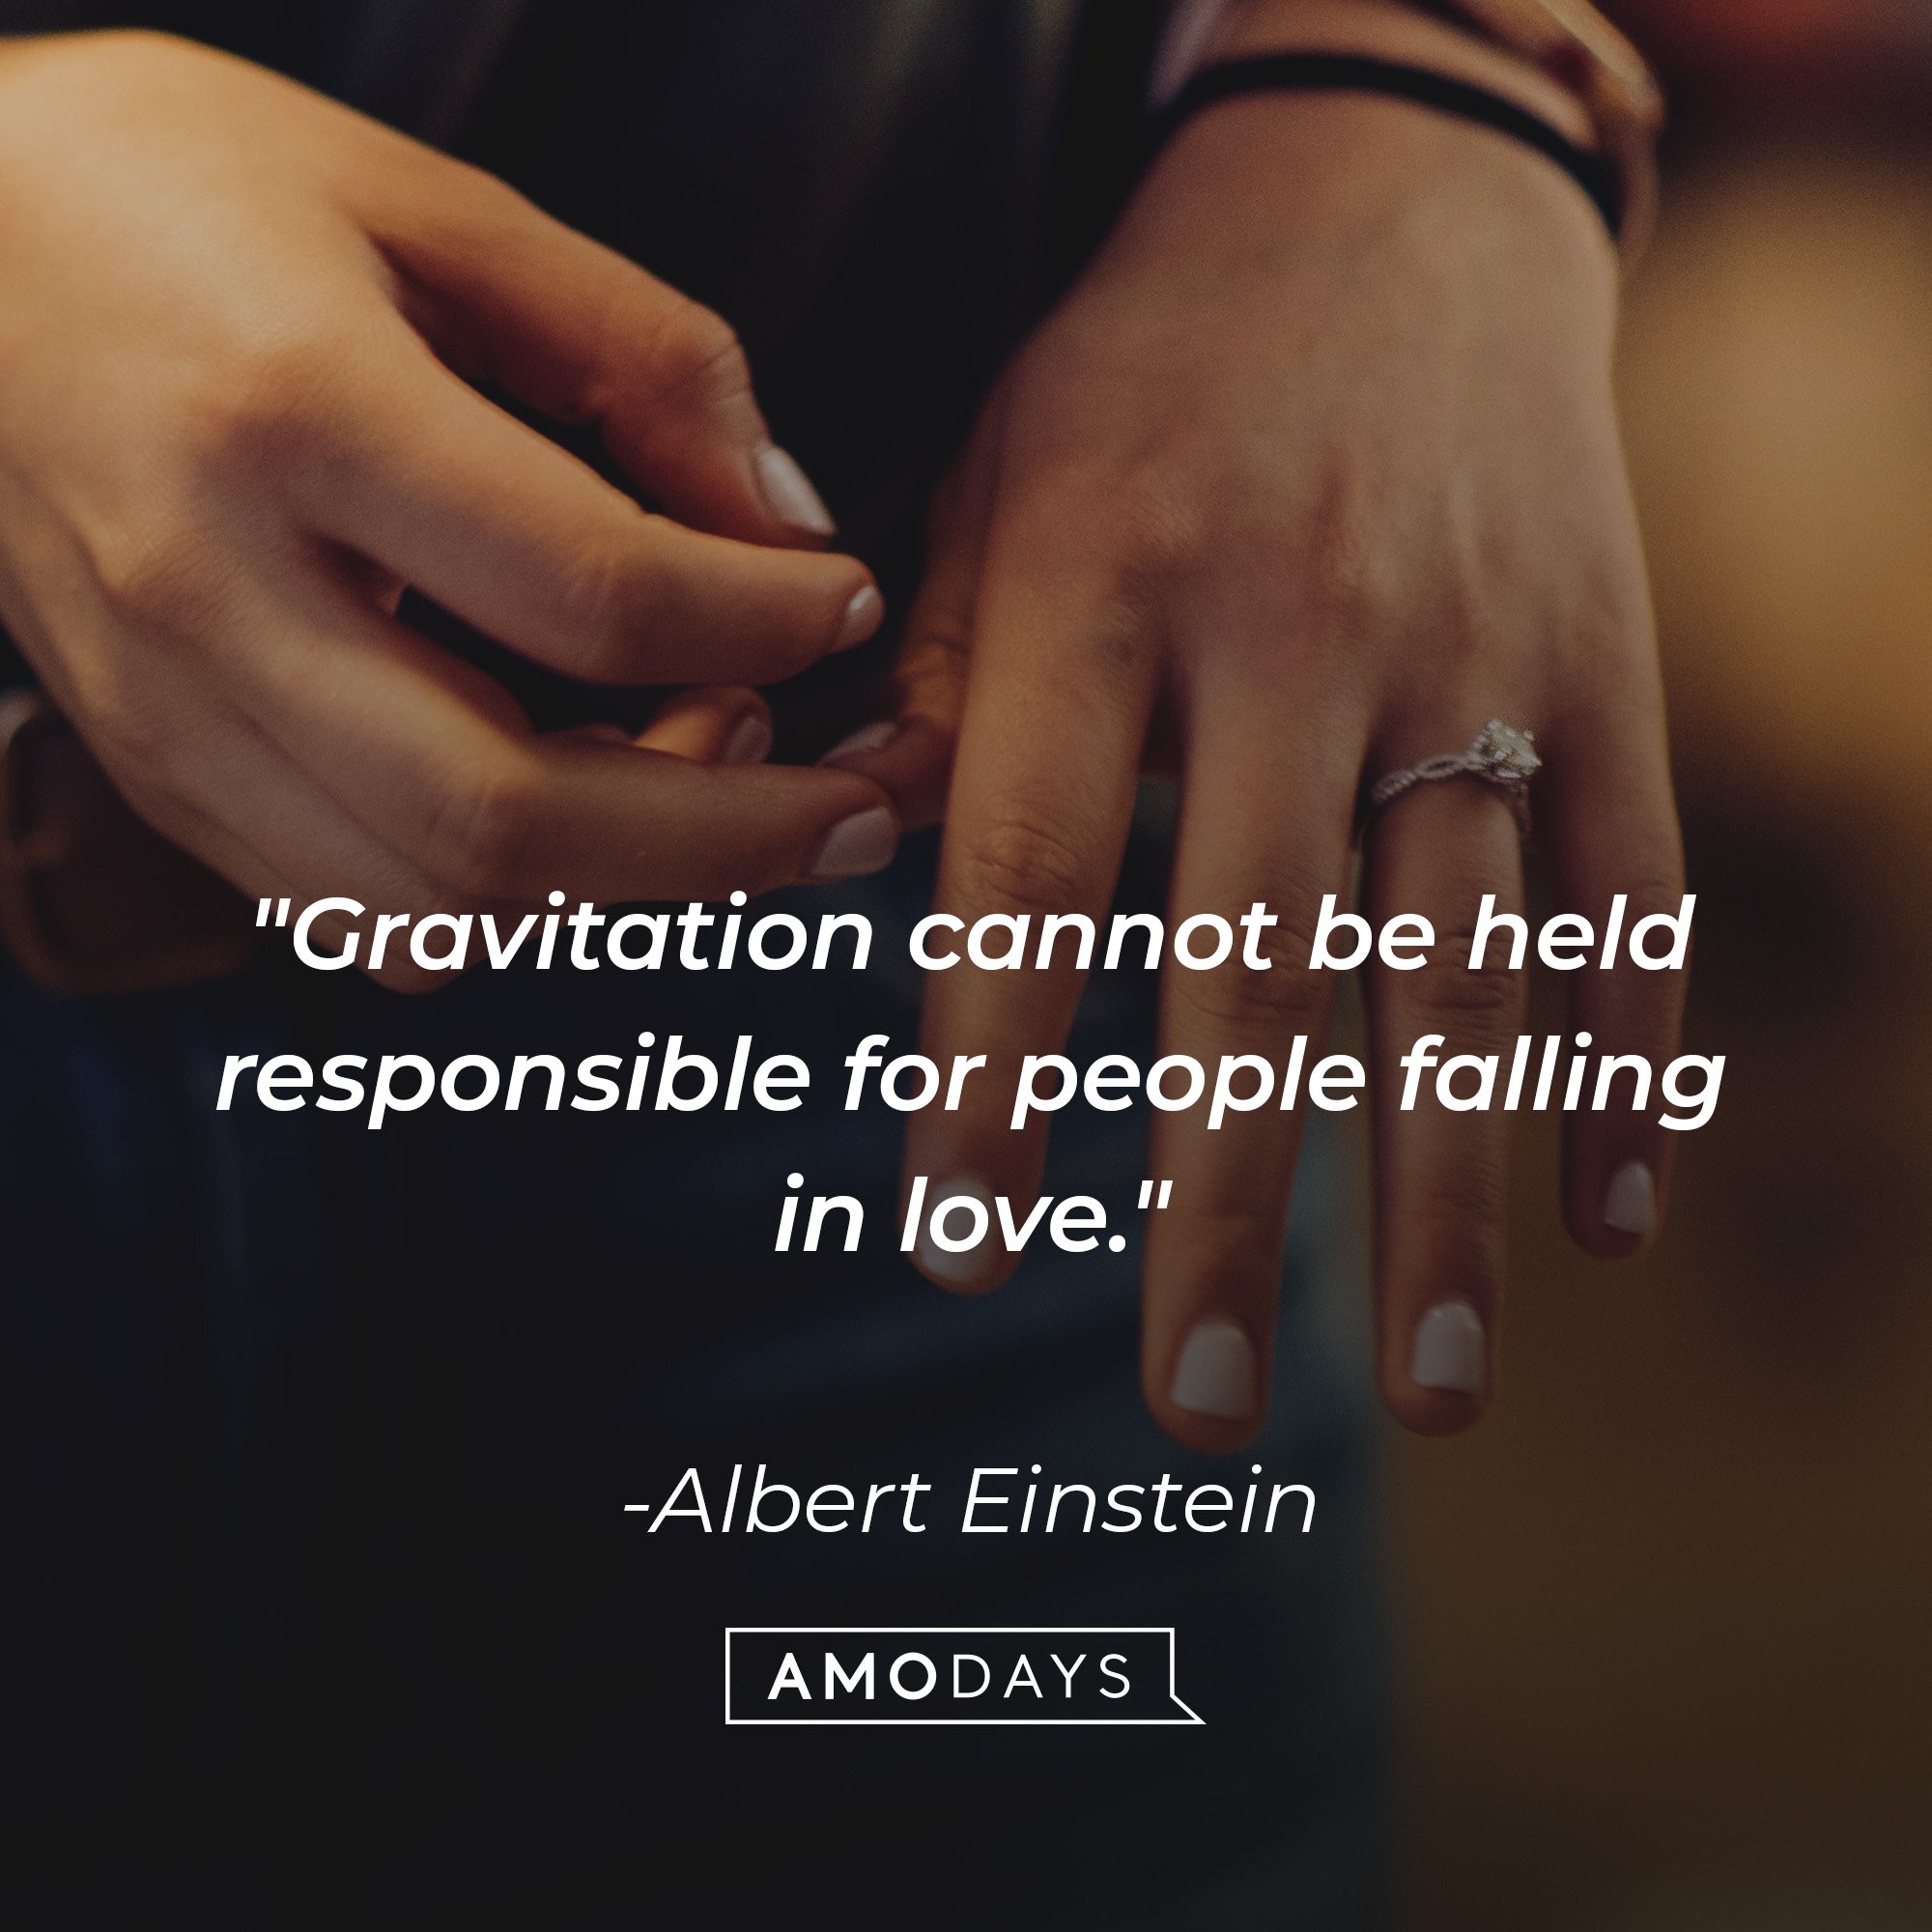 Albert Einstein's quote: "Gravitation cannot be held responsible for people falling in love." | Image: AmoDays